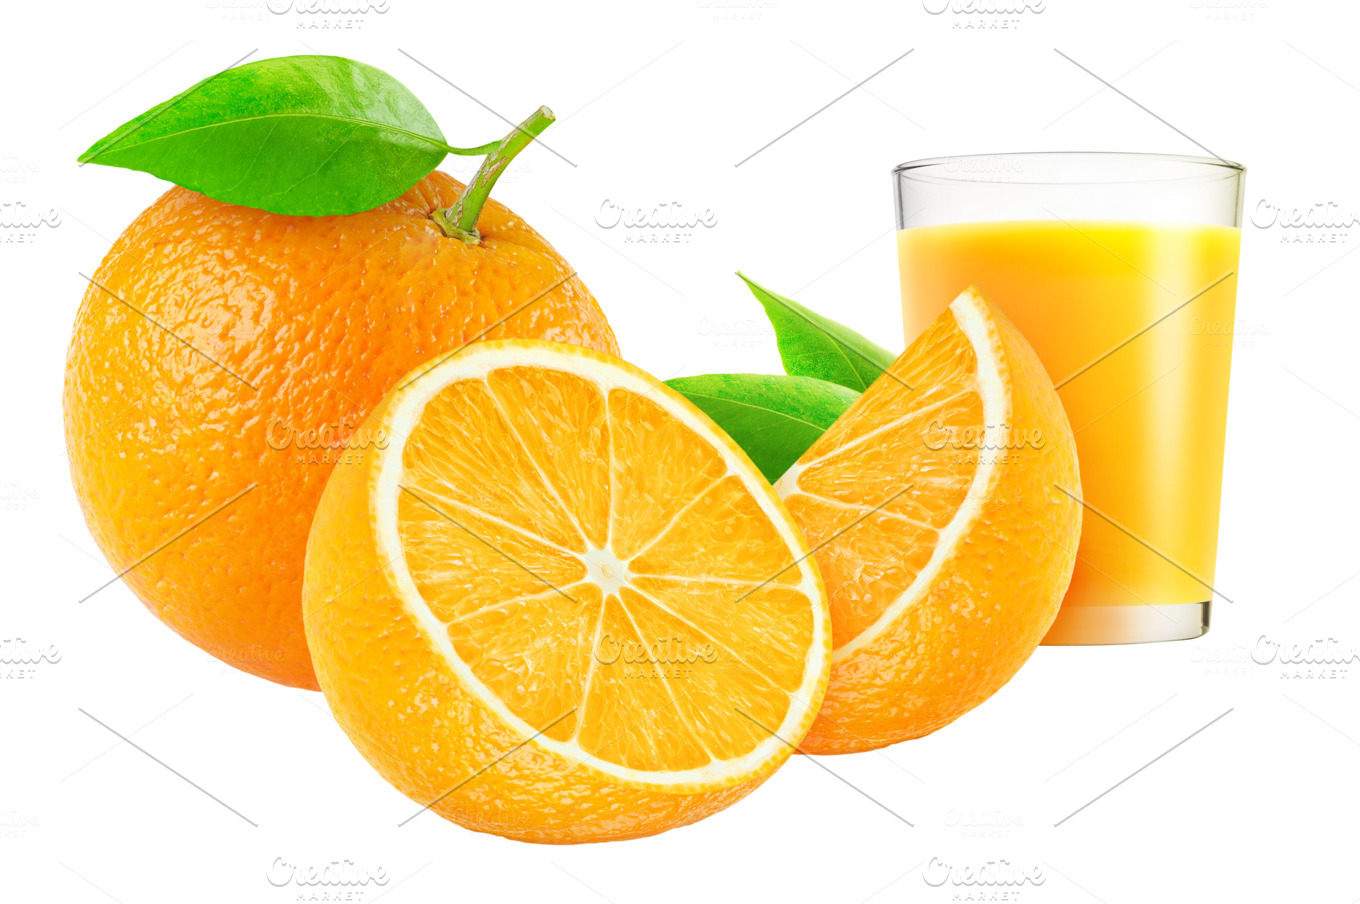 Cut oranges and glass of juice ~ Food & Drink Photos ...